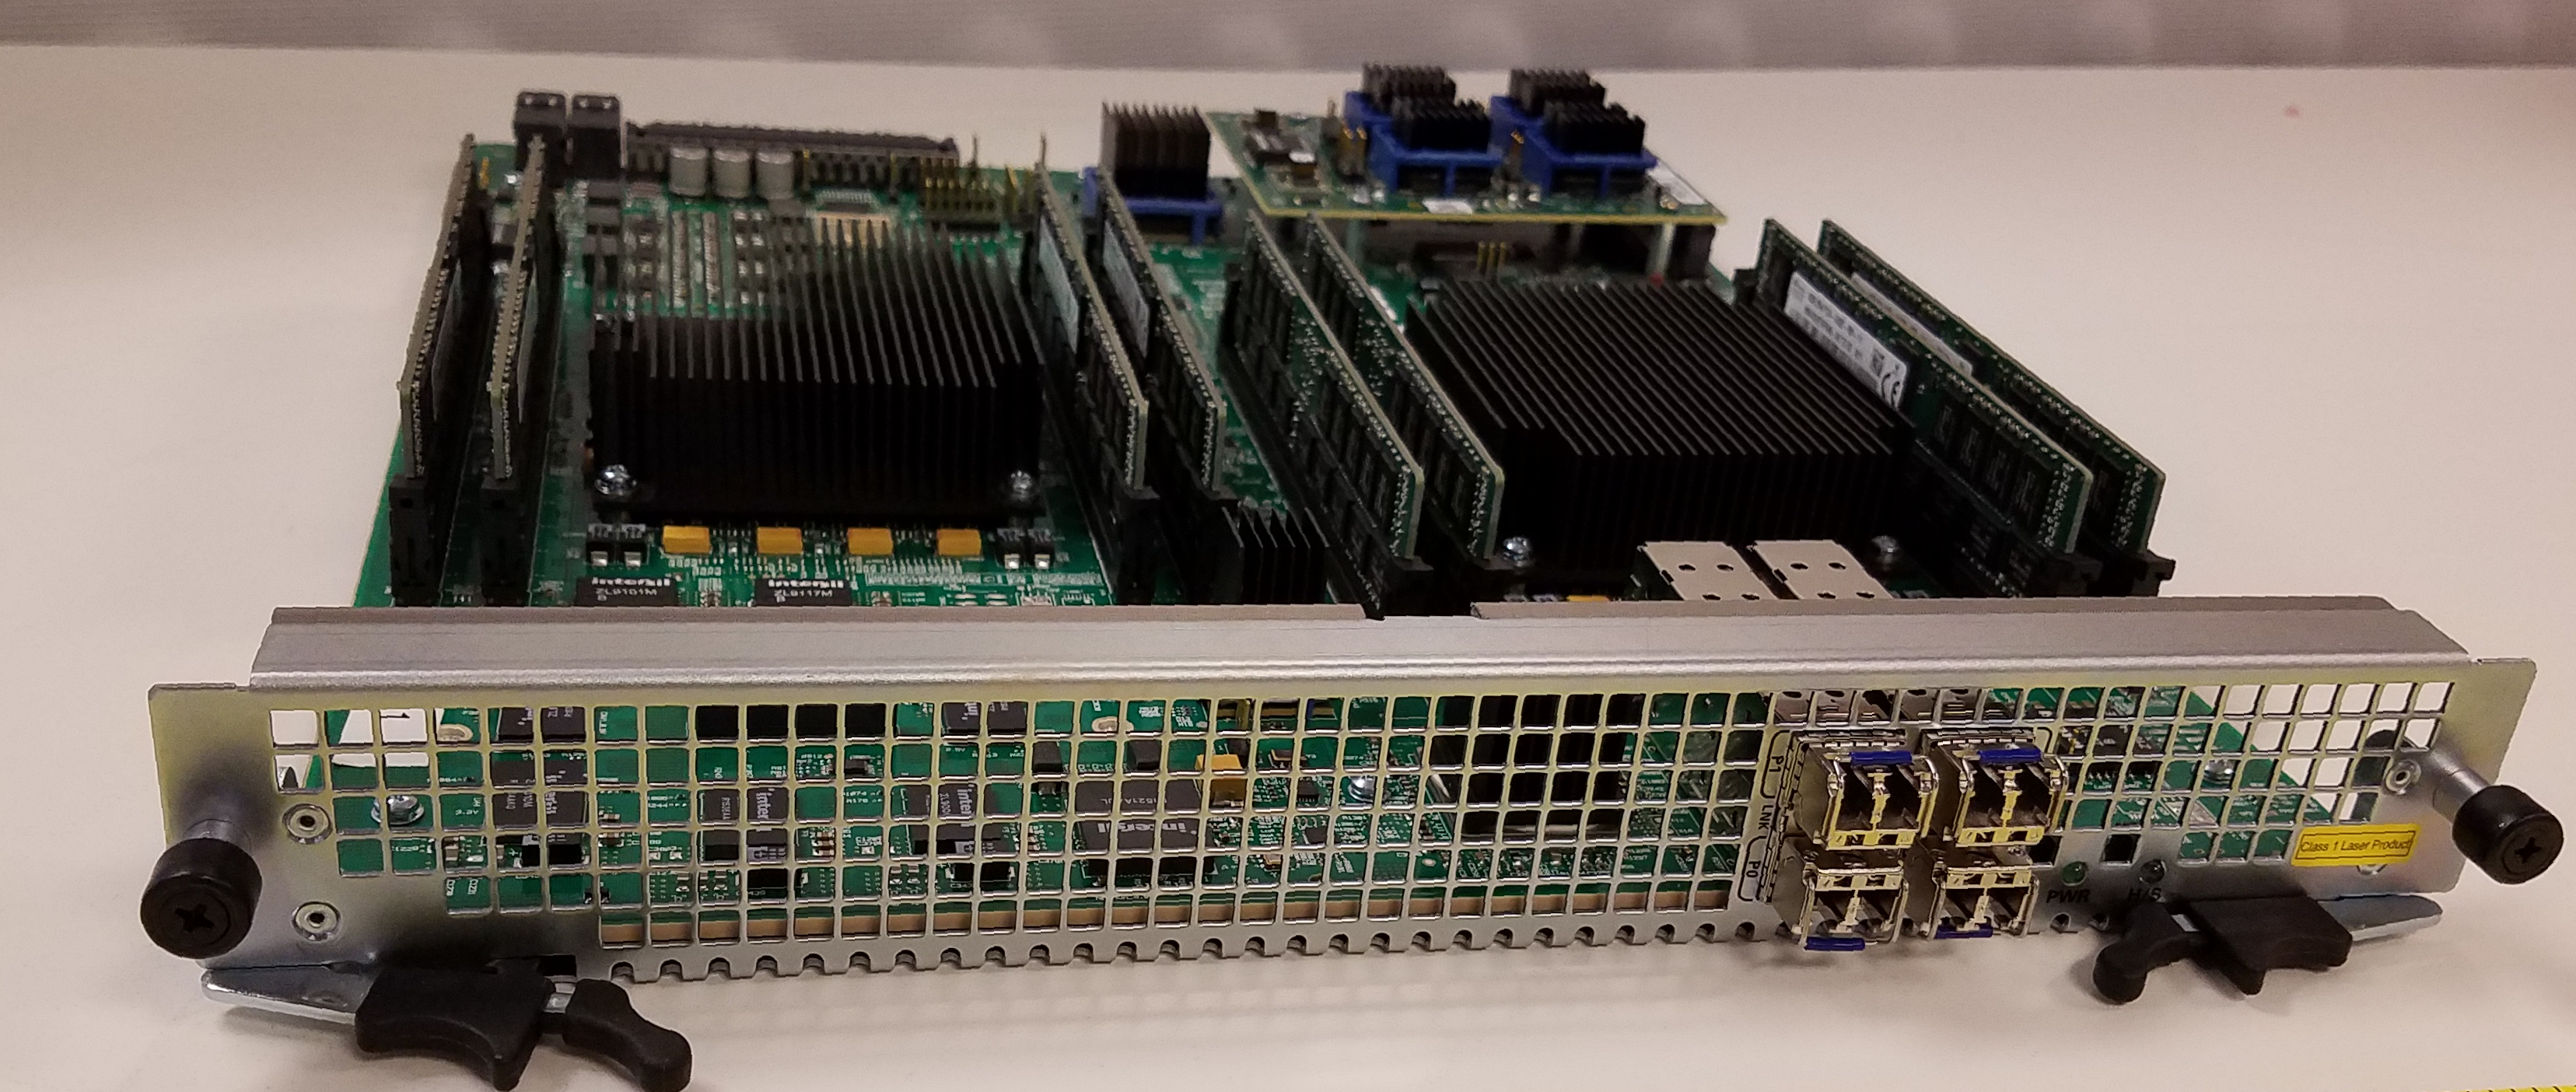 This image shows the alternate card option, a four port NIU, outside of the chassis.